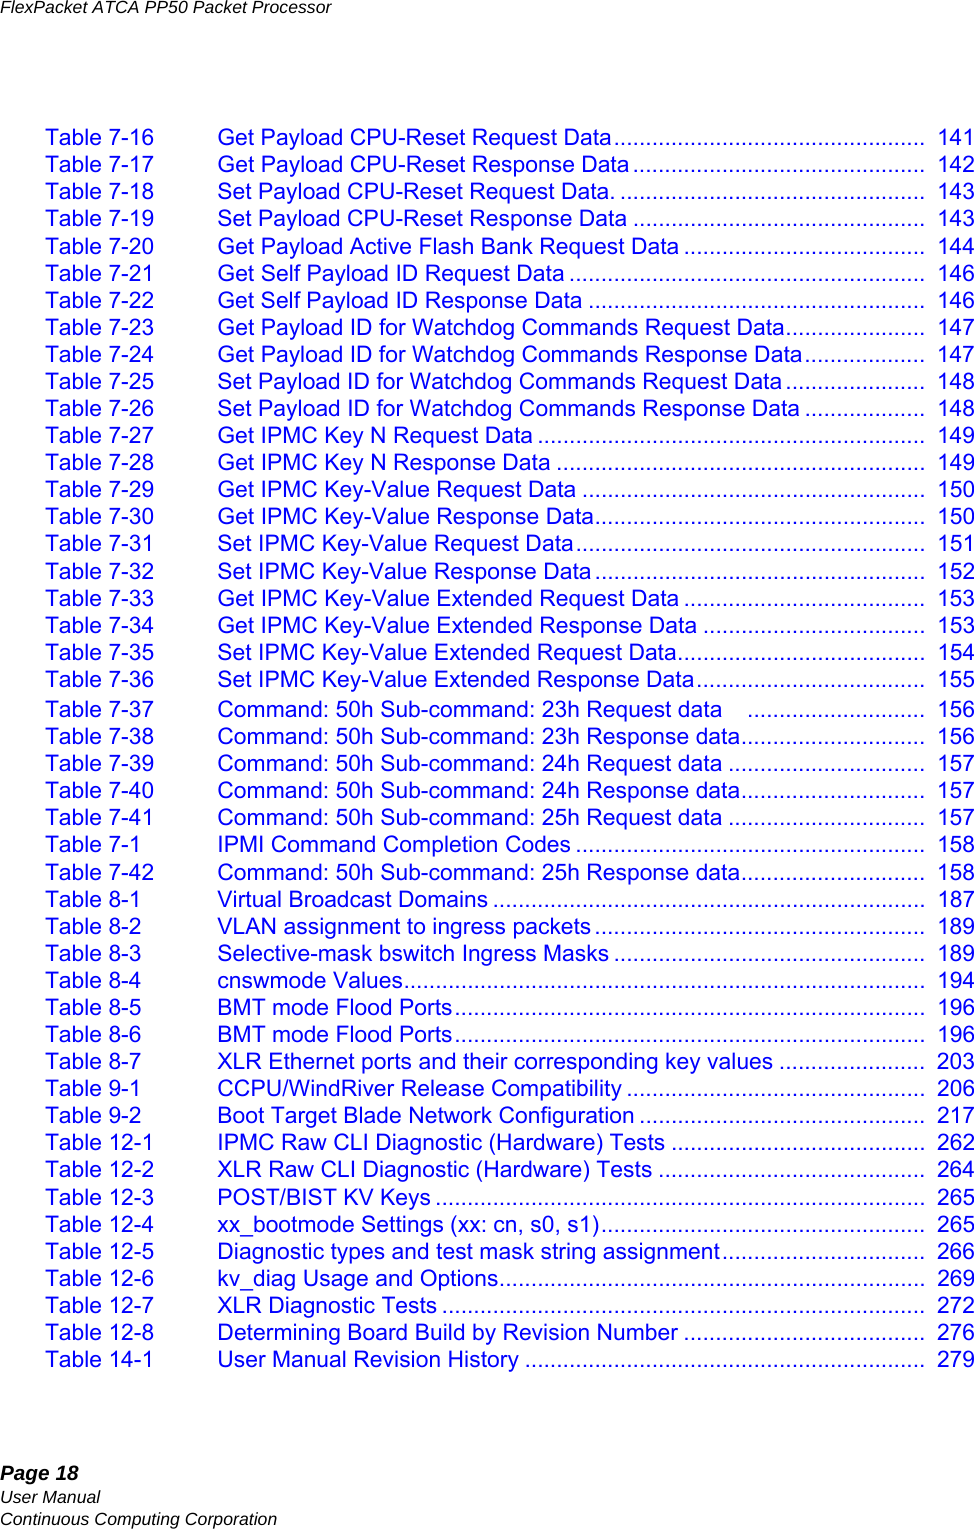 Page 18User ManualContinuous Computing CorporationFlexPacket ATCA PP50 Packet Processor     PreliminaryTable 7-16 Get Payload CPU-Reset Request Data.................................................  141Table 7-17 Get Payload CPU-Reset Response Data ..............................................  142Table 7-18 Set Payload CPU-Reset Request Data. ................................................  143Table 7-19 Set Payload CPU-Reset Response Data ..............................................  143Table 7-20 Get Payload Active Flash Bank Request Data ......................................  144Table 7-21 Get Self Payload ID Request Data ........................................................  146Table 7-22 Get Self Payload ID Response Data .....................................................  146Table 7-23 Get Payload ID for Watchdog Commands Request Data......................  147Table 7-24 Get Payload ID for Watchdog Commands Response Data...................  147Table 7-25 Set Payload ID for Watchdog Commands Request Data......................  148Table 7-26 Set Payload ID for Watchdog Commands Response Data ...................  148Table 7-27 Get IPMC Key N Request Data .............................................................  149Table 7-28 Get IPMC Key N Response Data ..........................................................  149Table 7-29 Get IPMC Key-Value Request Data ......................................................  150Table 7-30 Get IPMC Key-Value Response Data....................................................  150Table 7-31 Set IPMC Key-Value Request Data.......................................................  151Table 7-32 Set IPMC Key-Value Response Data ....................................................  152Table 7-33 Get IPMC Key-Value Extended Request Data ......................................  153Table 7-34 Get IPMC Key-Value Extended Response Data ...................................  153Table 7-35 Set IPMC Key-Value Extended Request Data.......................................  154Table 7-36 Set IPMC Key-Value Extended Response Data....................................  155Table 7-37 Command: 50h Sub-command: 23h Request data　............................  156Table 7-38 Command: 50h Sub-command: 23h Response data.............................  156Table 7-39 Command: 50h Sub-command: 24h Request data ...............................  157Table 7-40 Command: 50h Sub-command: 24h Response data.............................  157Table 7-41 Command: 50h Sub-command: 25h Request data ...............................  157Table 7-1 IPMI Command Completion Codes .......................................................  158Table 7-42 Command: 50h Sub-command: 25h Response data.............................  158Table 8-1 Virtual Broadcast Domains ....................................................................  187Table 8-2 VLAN assignment to ingress packets....................................................  189Table 8-3 Selective-mask bswitch Ingress Masks .................................................  189Table 8-4 cnswmode Values..................................................................................  194Table 8-5 BMT mode Flood Ports..........................................................................  196Table 8-6 BMT mode Flood Ports..........................................................................  196Table 8-7 XLR Ethernet ports and their corresponding key values .......................  203Table 9-1 CCPU/WindRiver Release Compatibility ...............................................  206Table 9-2 Boot Target Blade Network Configuration .............................................  217Table 12-1 IPMC Raw CLI Diagnostic (Hardware) Tests ........................................  262Table 12-2 XLR Raw CLI Diagnostic (Hardware) Tests ..........................................  264Table 12-3 POST/BIST KV Keys .............................................................................  265Table 12-4 xx_bootmode Settings (xx: cn, s0, s1)...................................................  265Table 12-5 Diagnostic types and test mask string assignment................................  266Table 12-6 kv_diag Usage and Options...................................................................  269Table 12-7 XLR Diagnostic Tests ............................................................................  272Table 12-8 Determining Board Build by Revision Number ......................................  276Table 14-1 User Manual Revision History ...............................................................  279